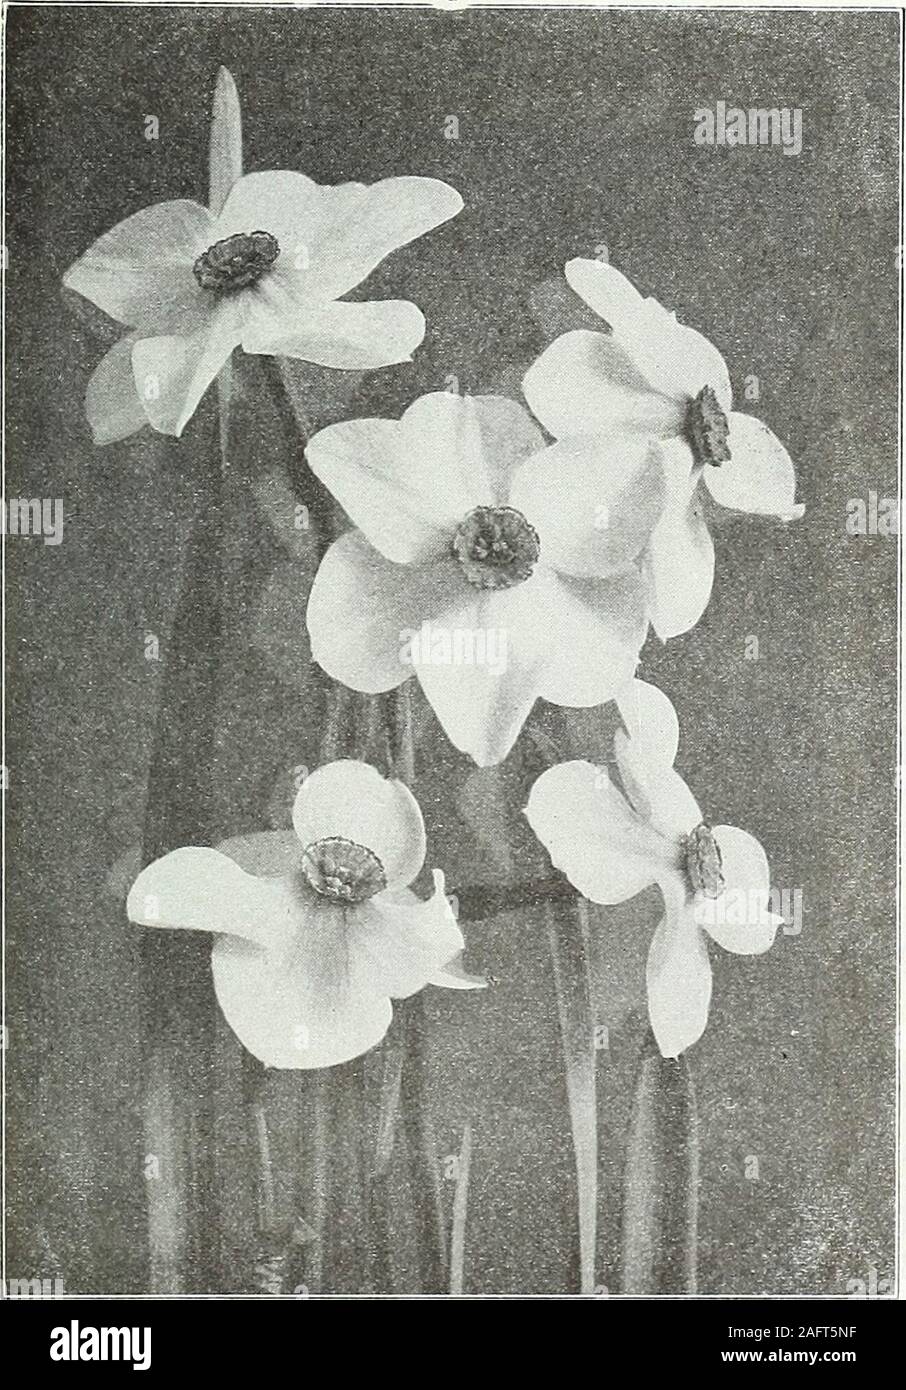 . Farquhar's autumn catalogue : 1921. eing cut $0.60 $4.75 $45.00 Firebrand. Creamy-white; fiery-red cup .... Lady Godiva. Perianth white, cup large and heavily stained,bright orange-scarlet; large, handsome flower SeagulL An exceedingly charming flower with large, spread-ing, pure white perianth; cup canary-yellow edged apricot LEEDSII DAFFODILS.—(AWctssws Leedsii.) EUCMARIS FLOWERED OR SILVER-WHITEFRAGRANT STAR NARCISSL Comprising all the chalice-cupped and short-cupped Narcissi having white. perianth and cup or crown of white, cream or pale yellow. Minnie Hume. Large white perianth; spreadi Stock Photo